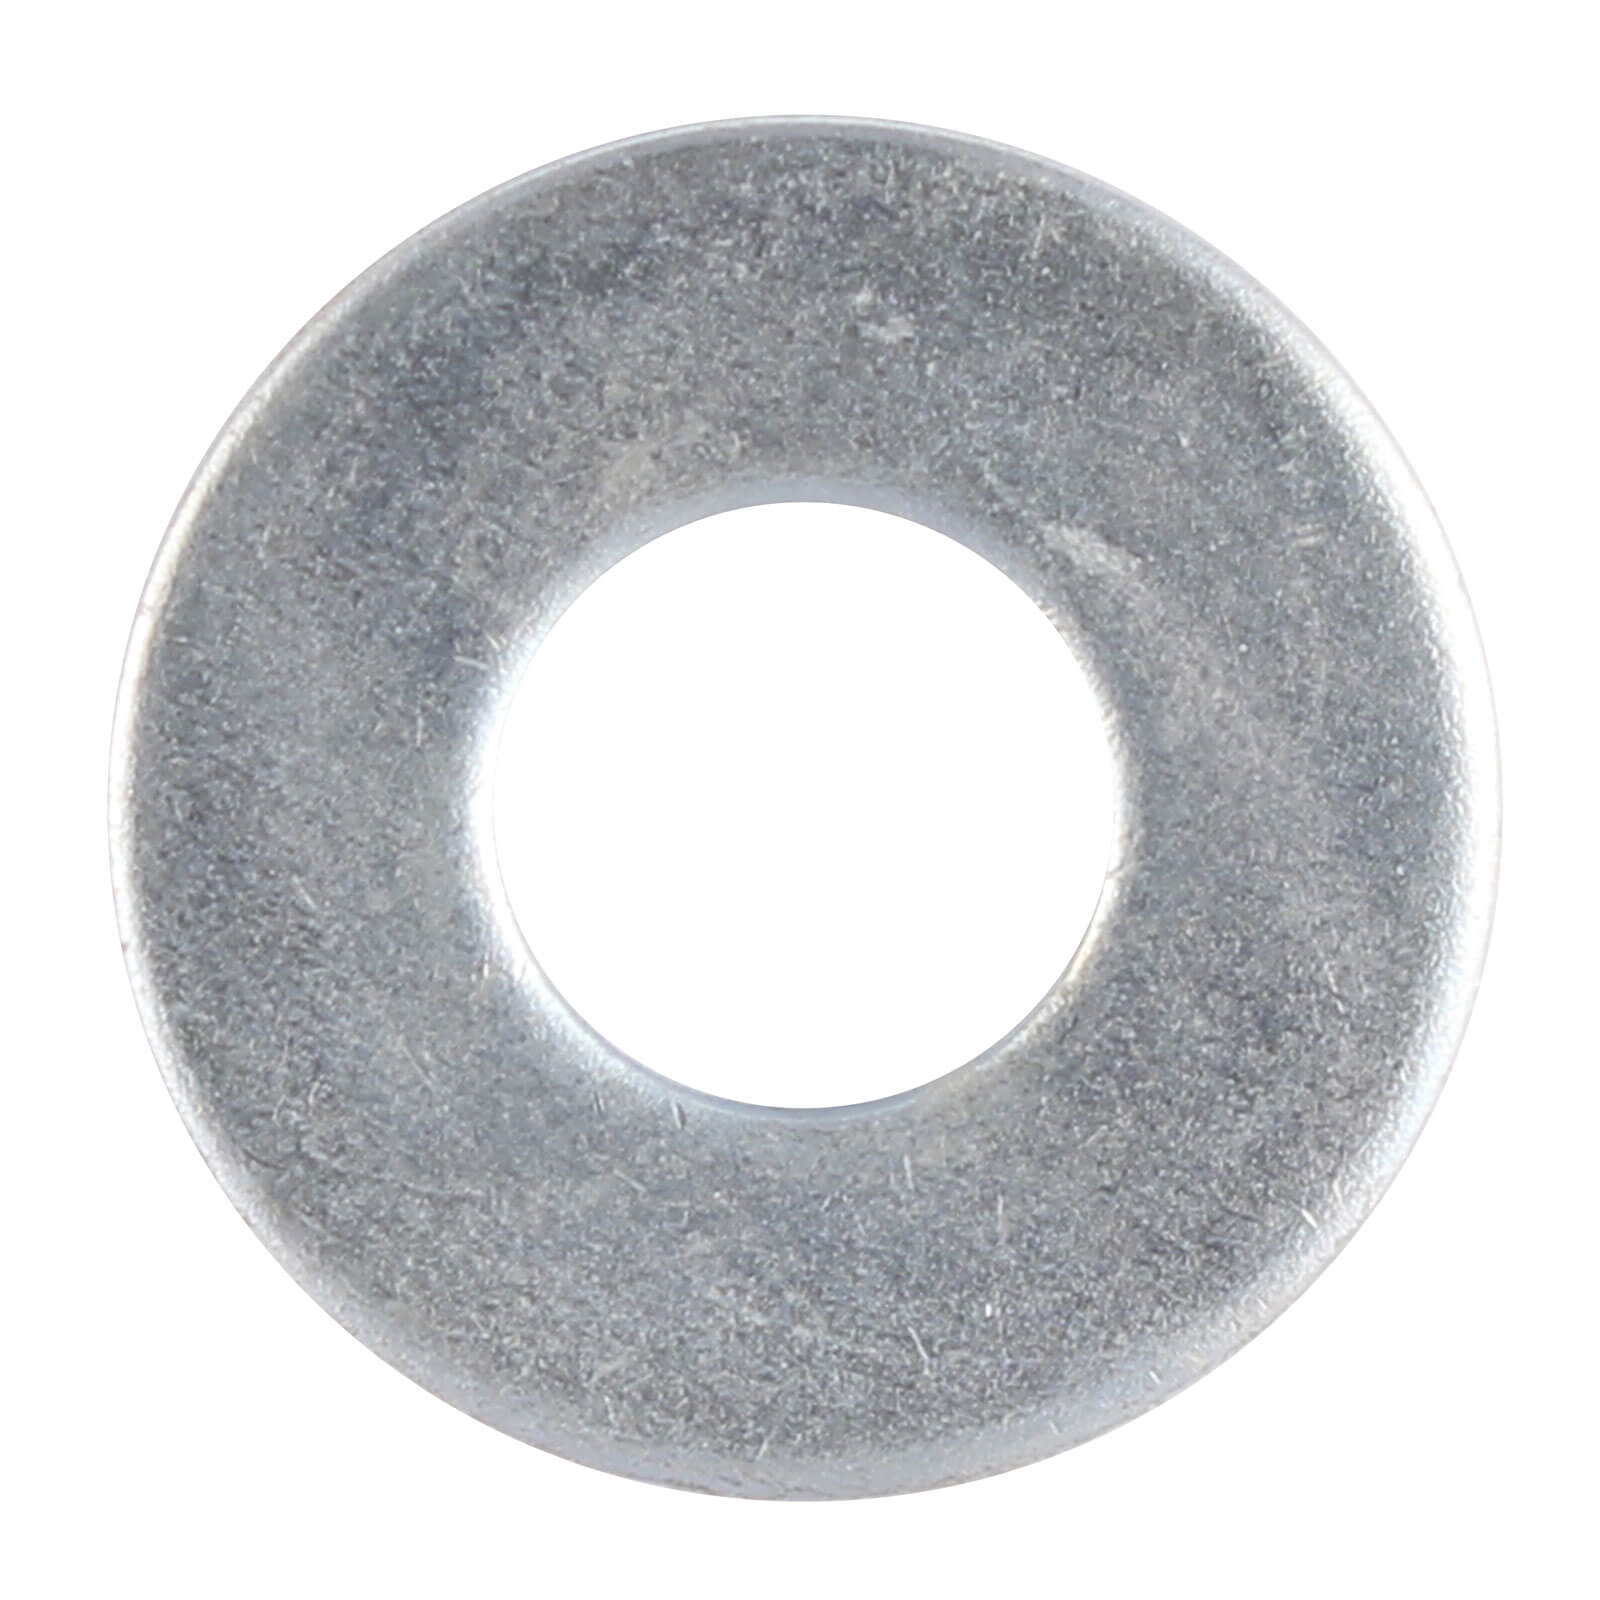 Image of Steel Washers Zinc Plated 20mm 37mm Pack of 100